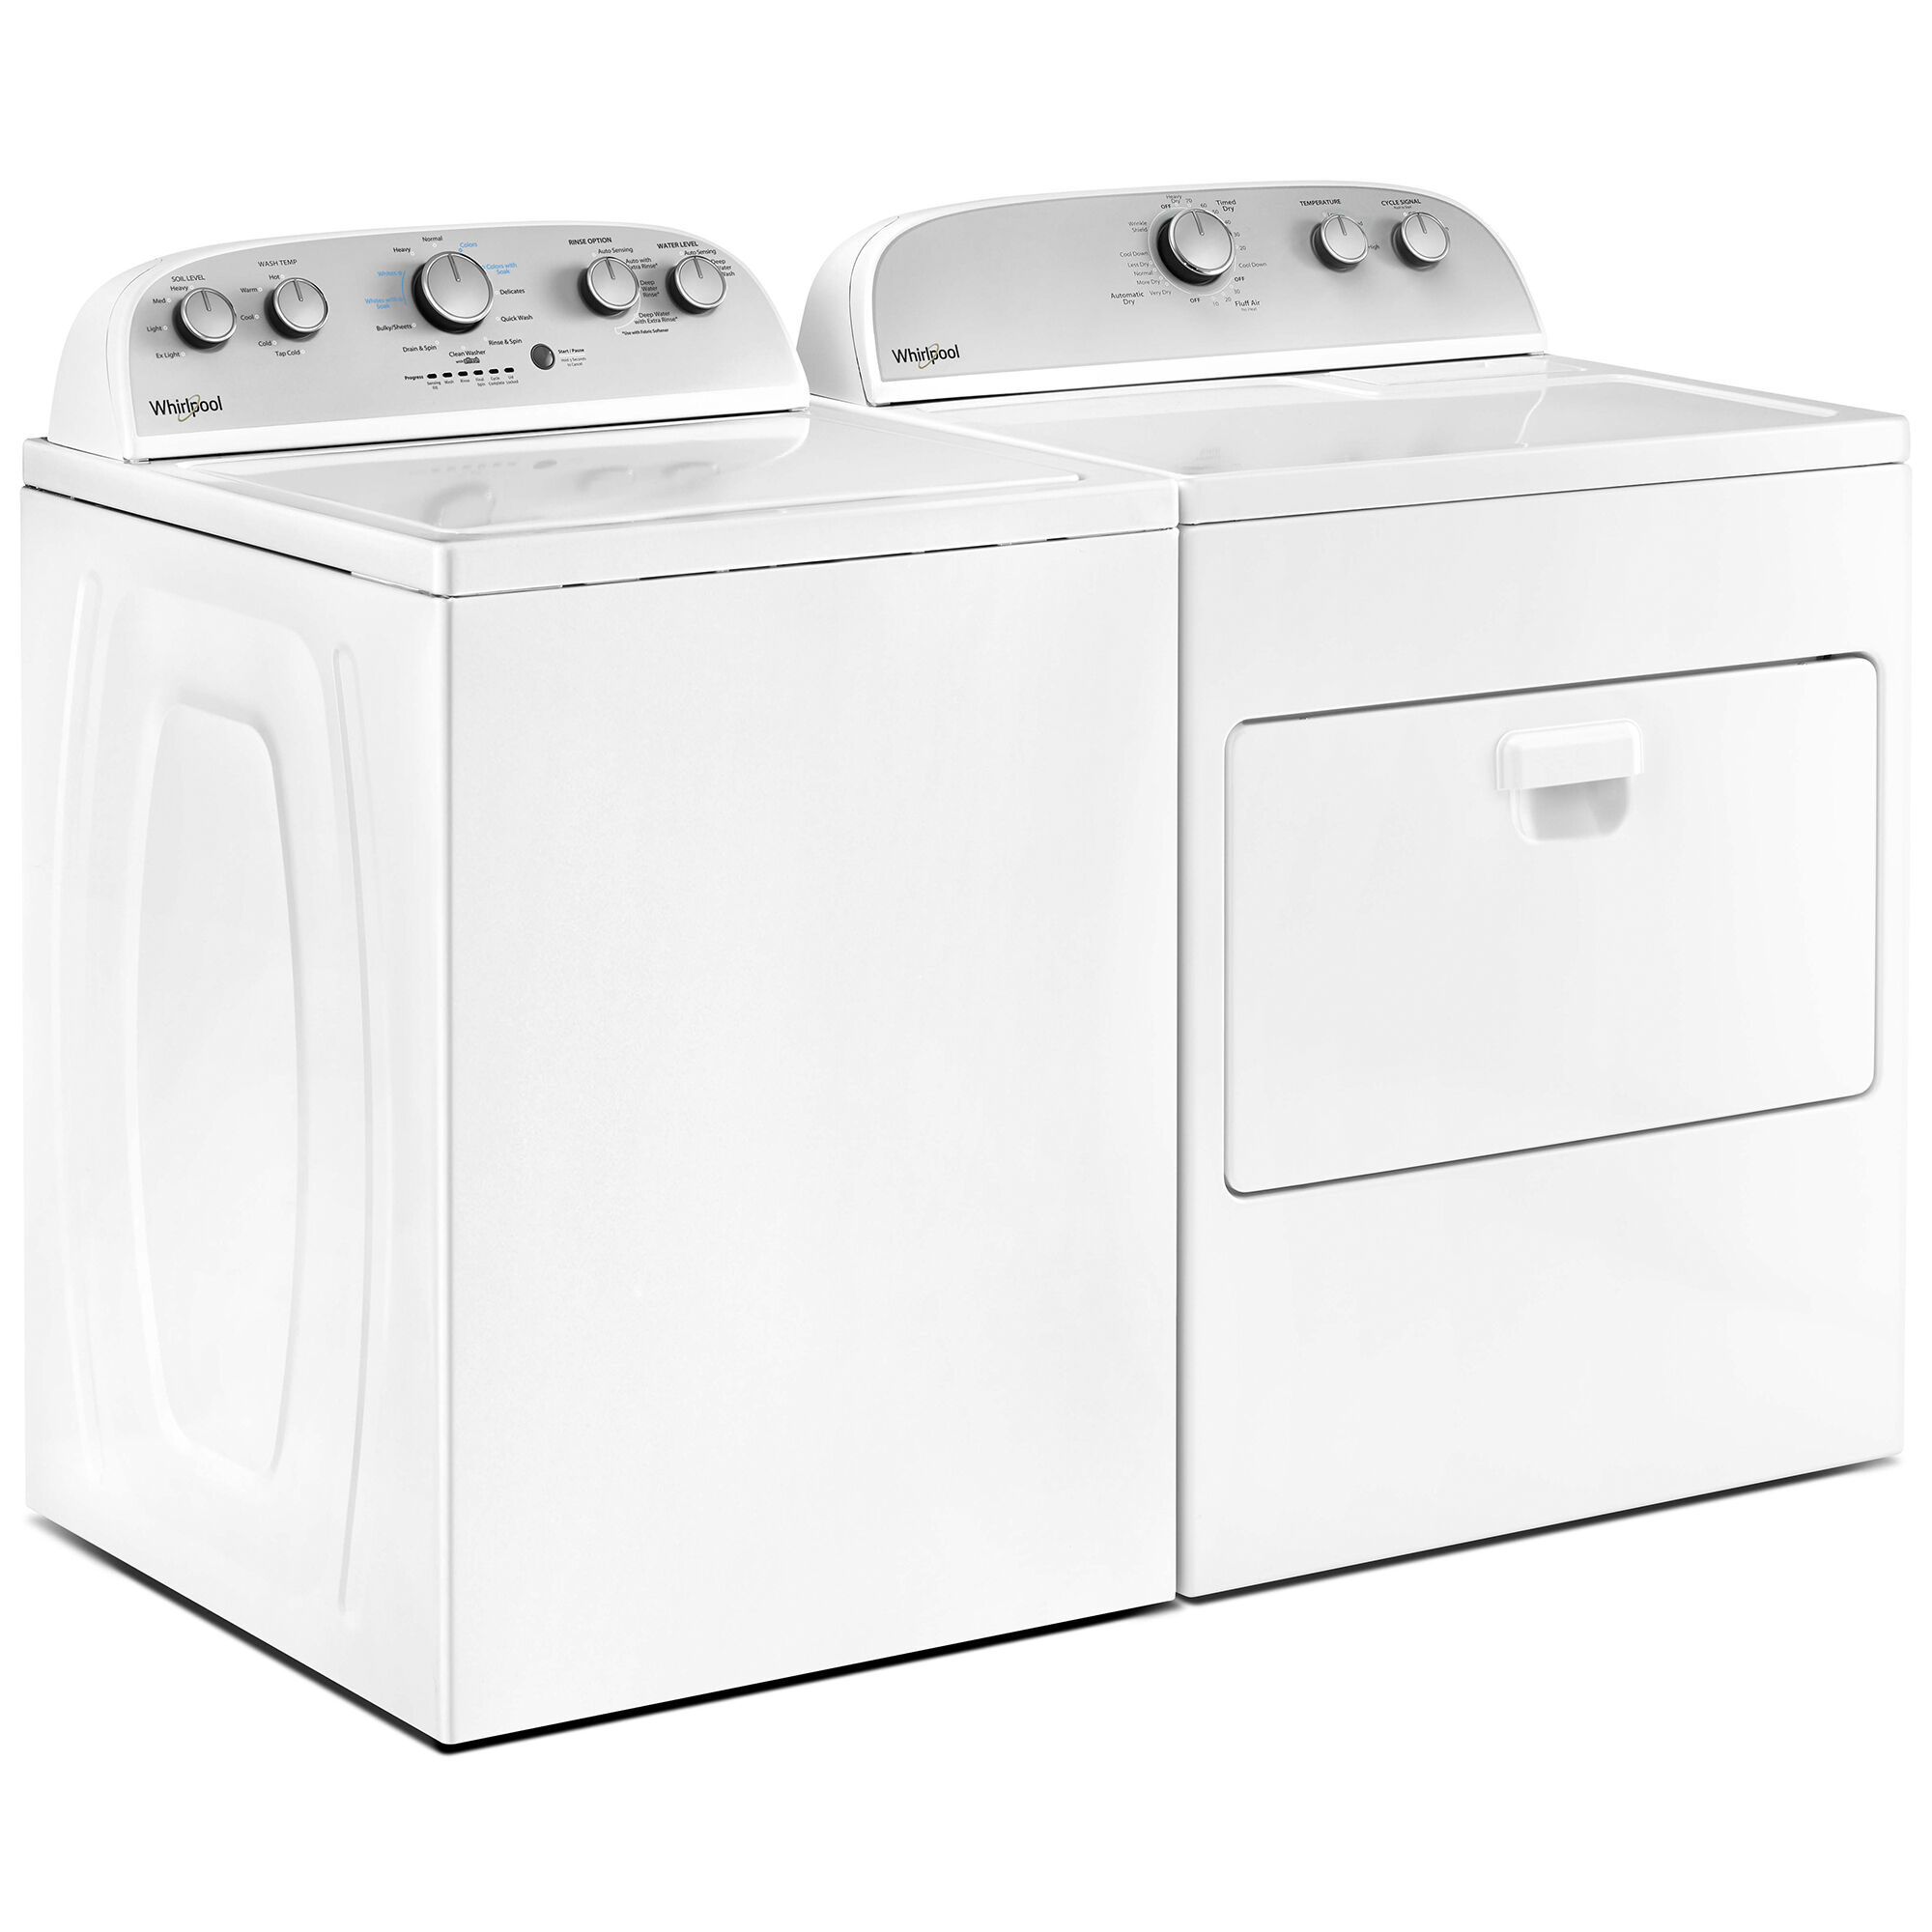 Whirlpool 29 in. 7.0 cu. ft. Electric Dryer with AutoDry Drying System -  White